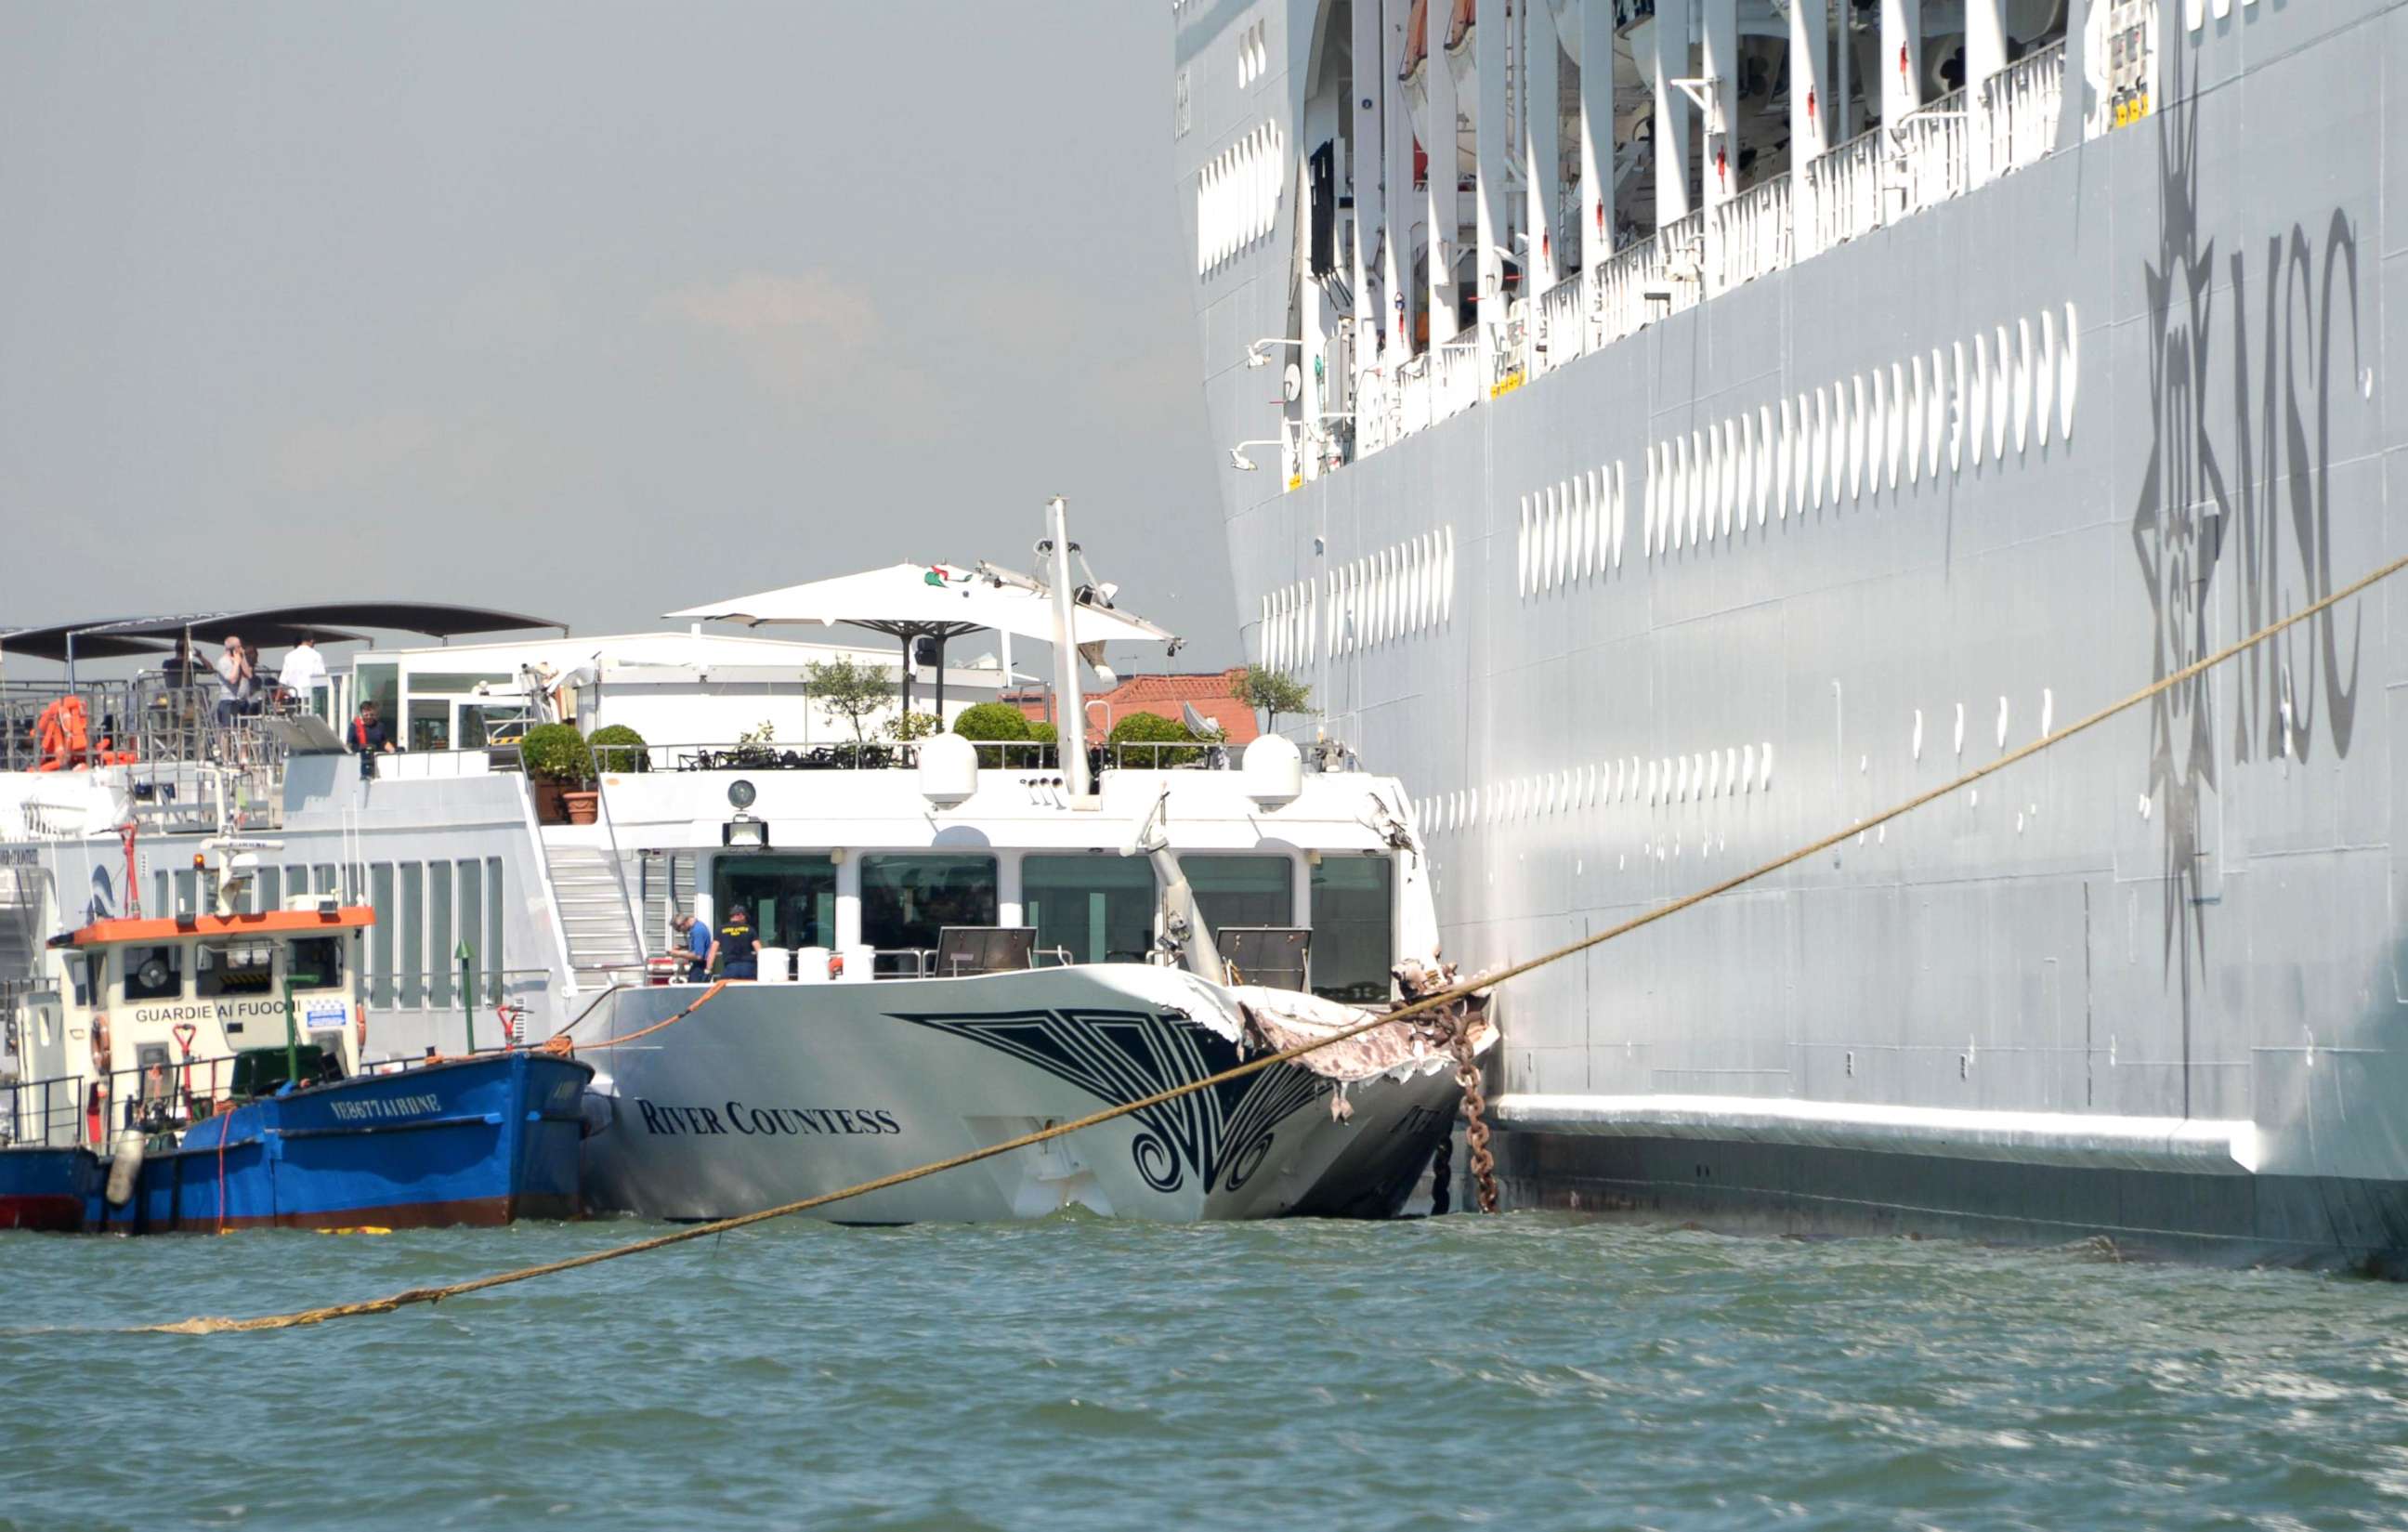 PHOTO: The cruise ship MSC Opera (R) is seen after the collision with a tourist boat, in Venice, Italy, June 2, 2019. 